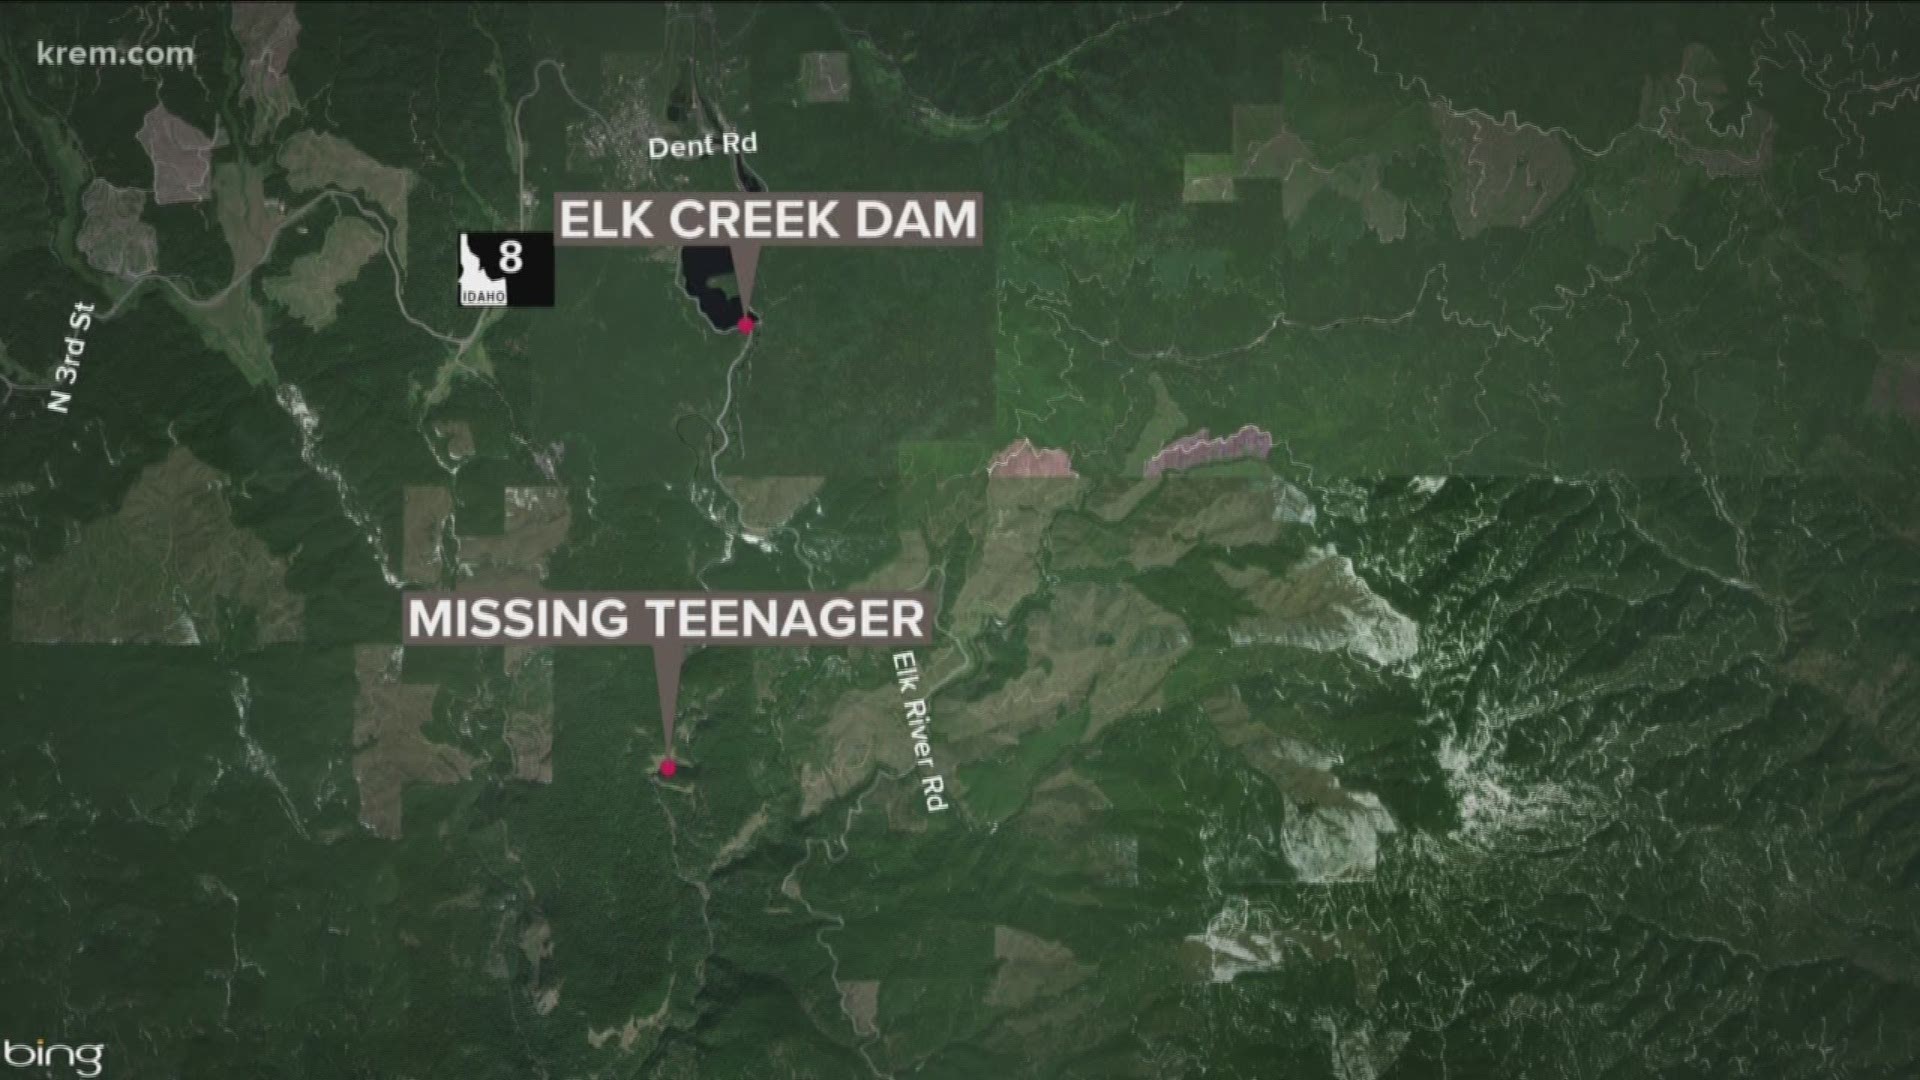 The 16-year-old boy was hiking at Elk Creek Falls on Sunday when he lost his footing and fell in, authorities said. Water flow in the area will be reduced on Tuesday to assist with the search.